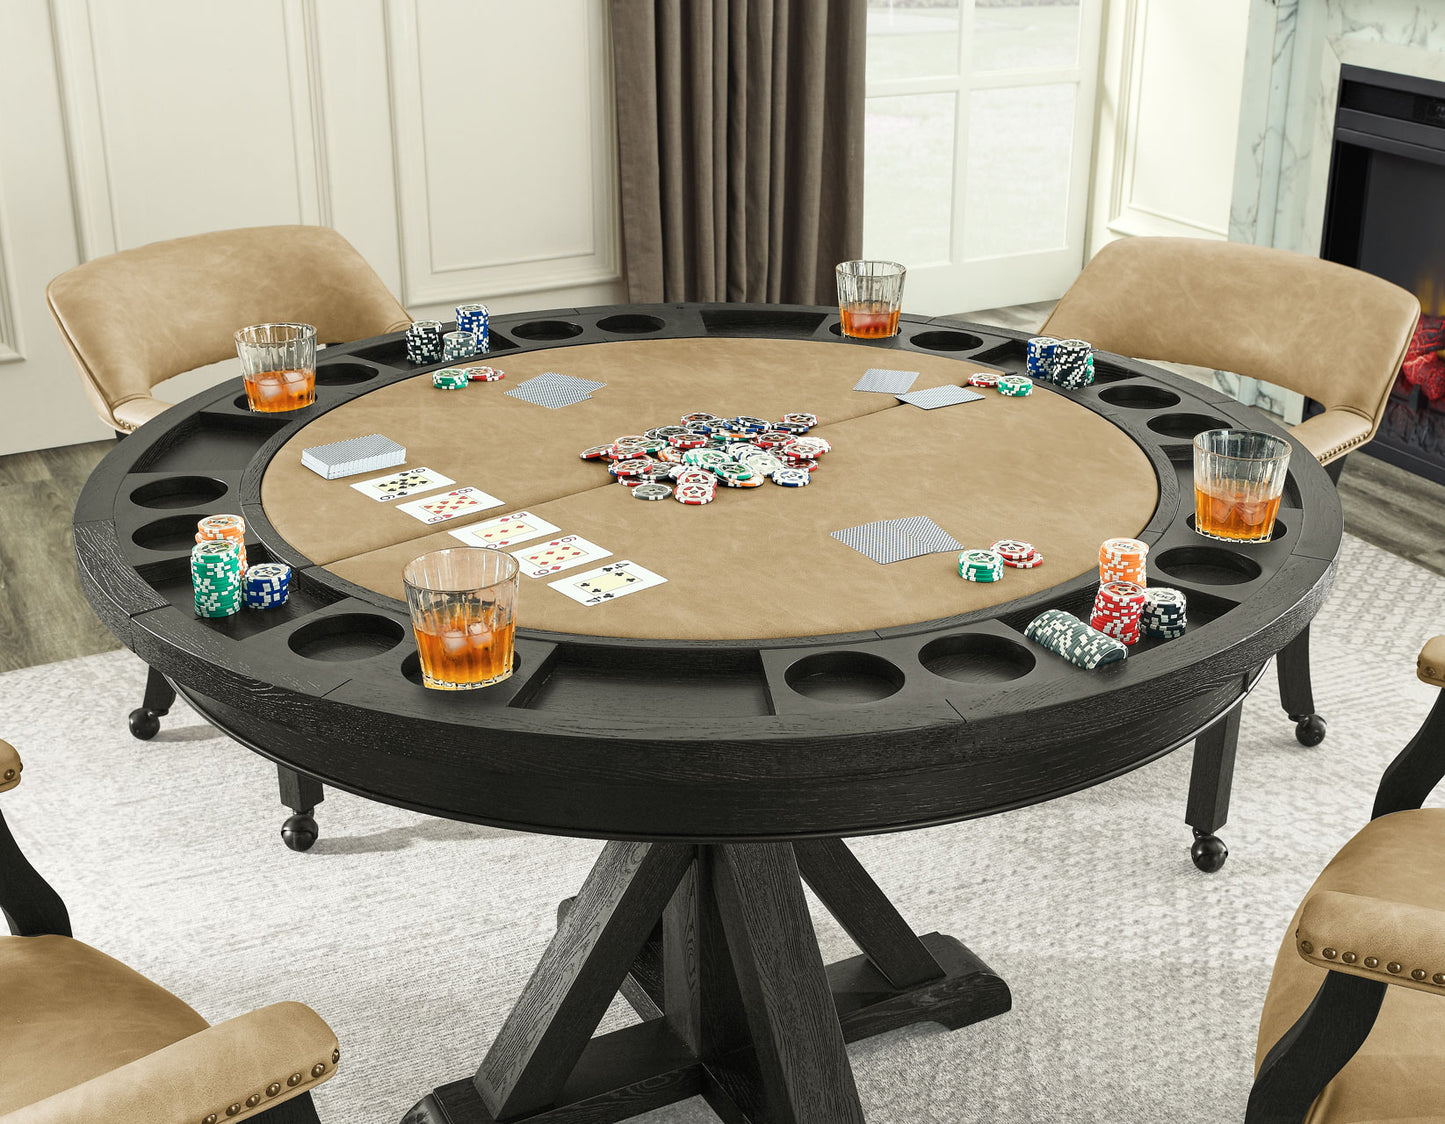 Rylie 48-inch Round Dining Table with Folding Game Top, Black Finish